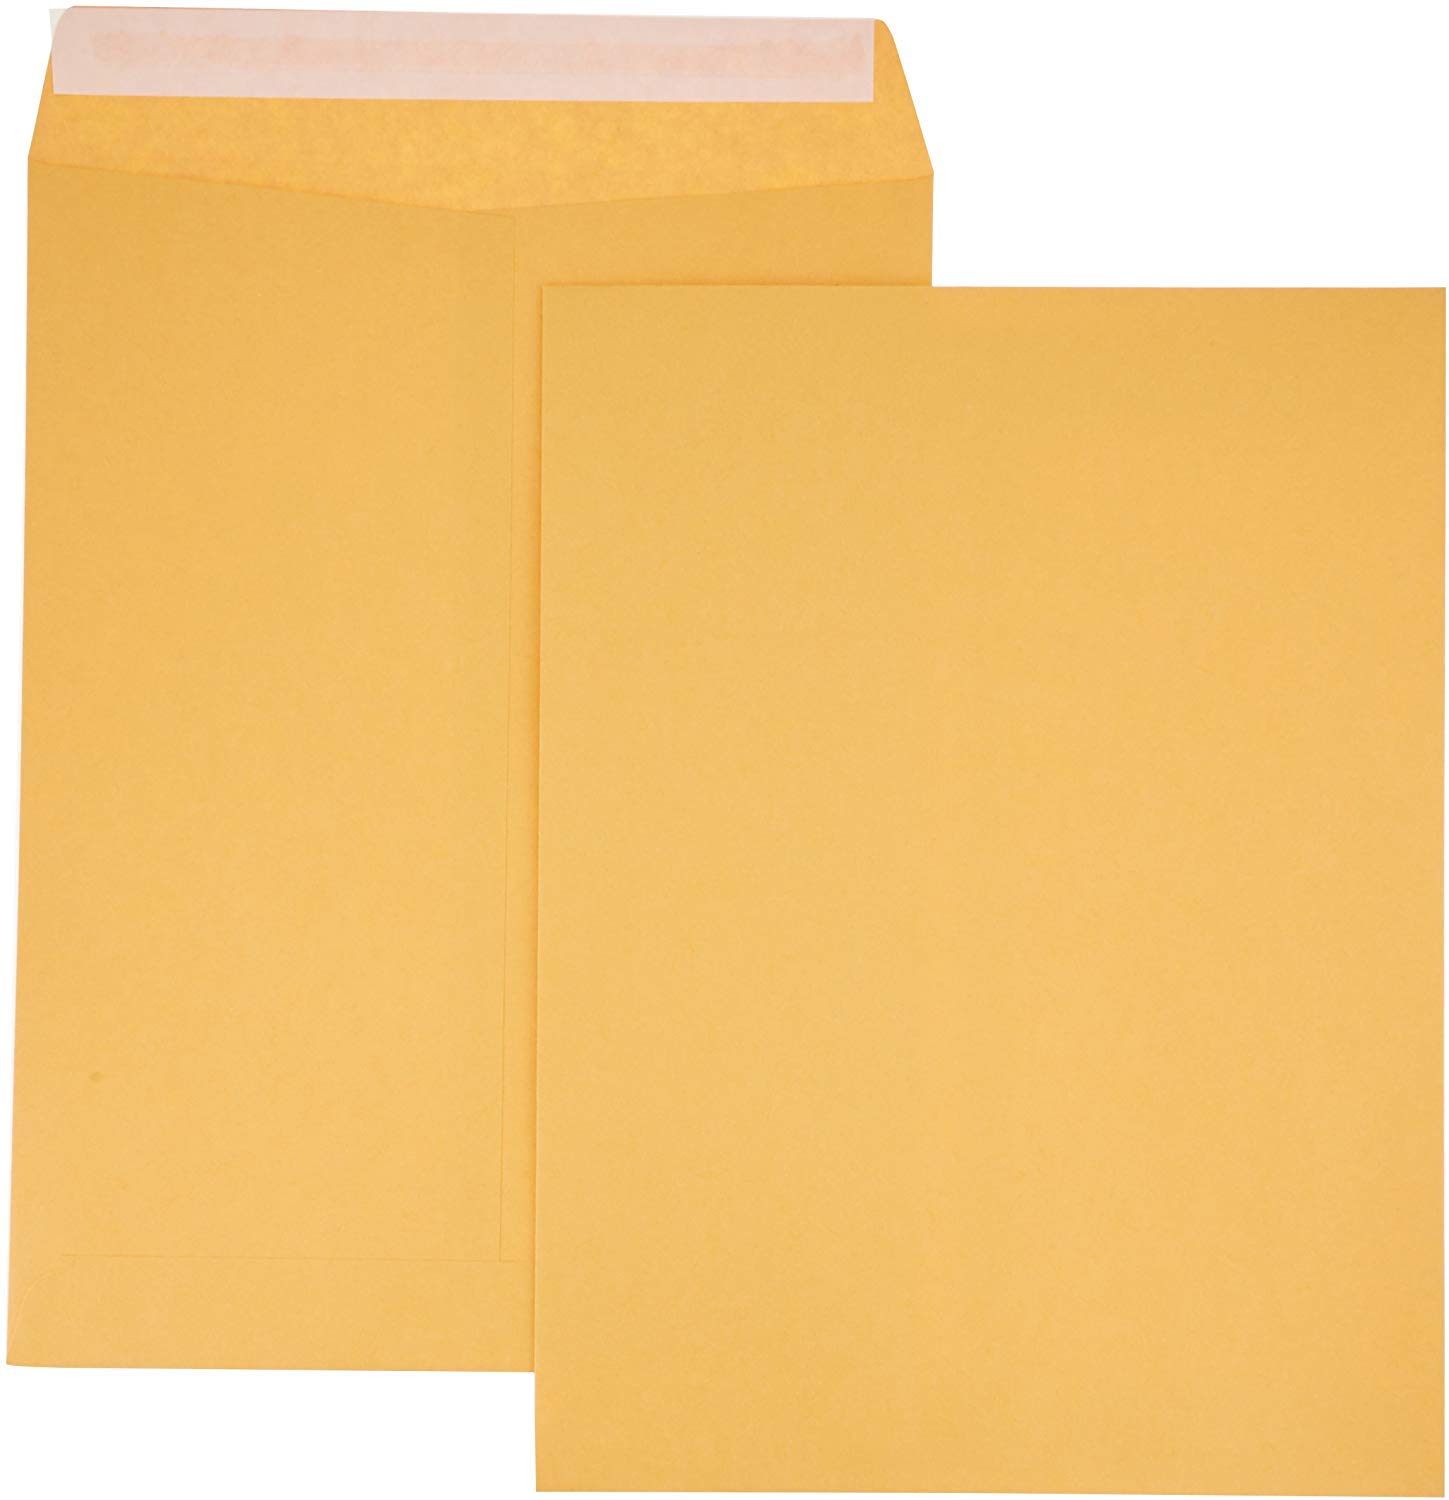 Manilla envelope 8.5x11 showing front and back with sticky flap